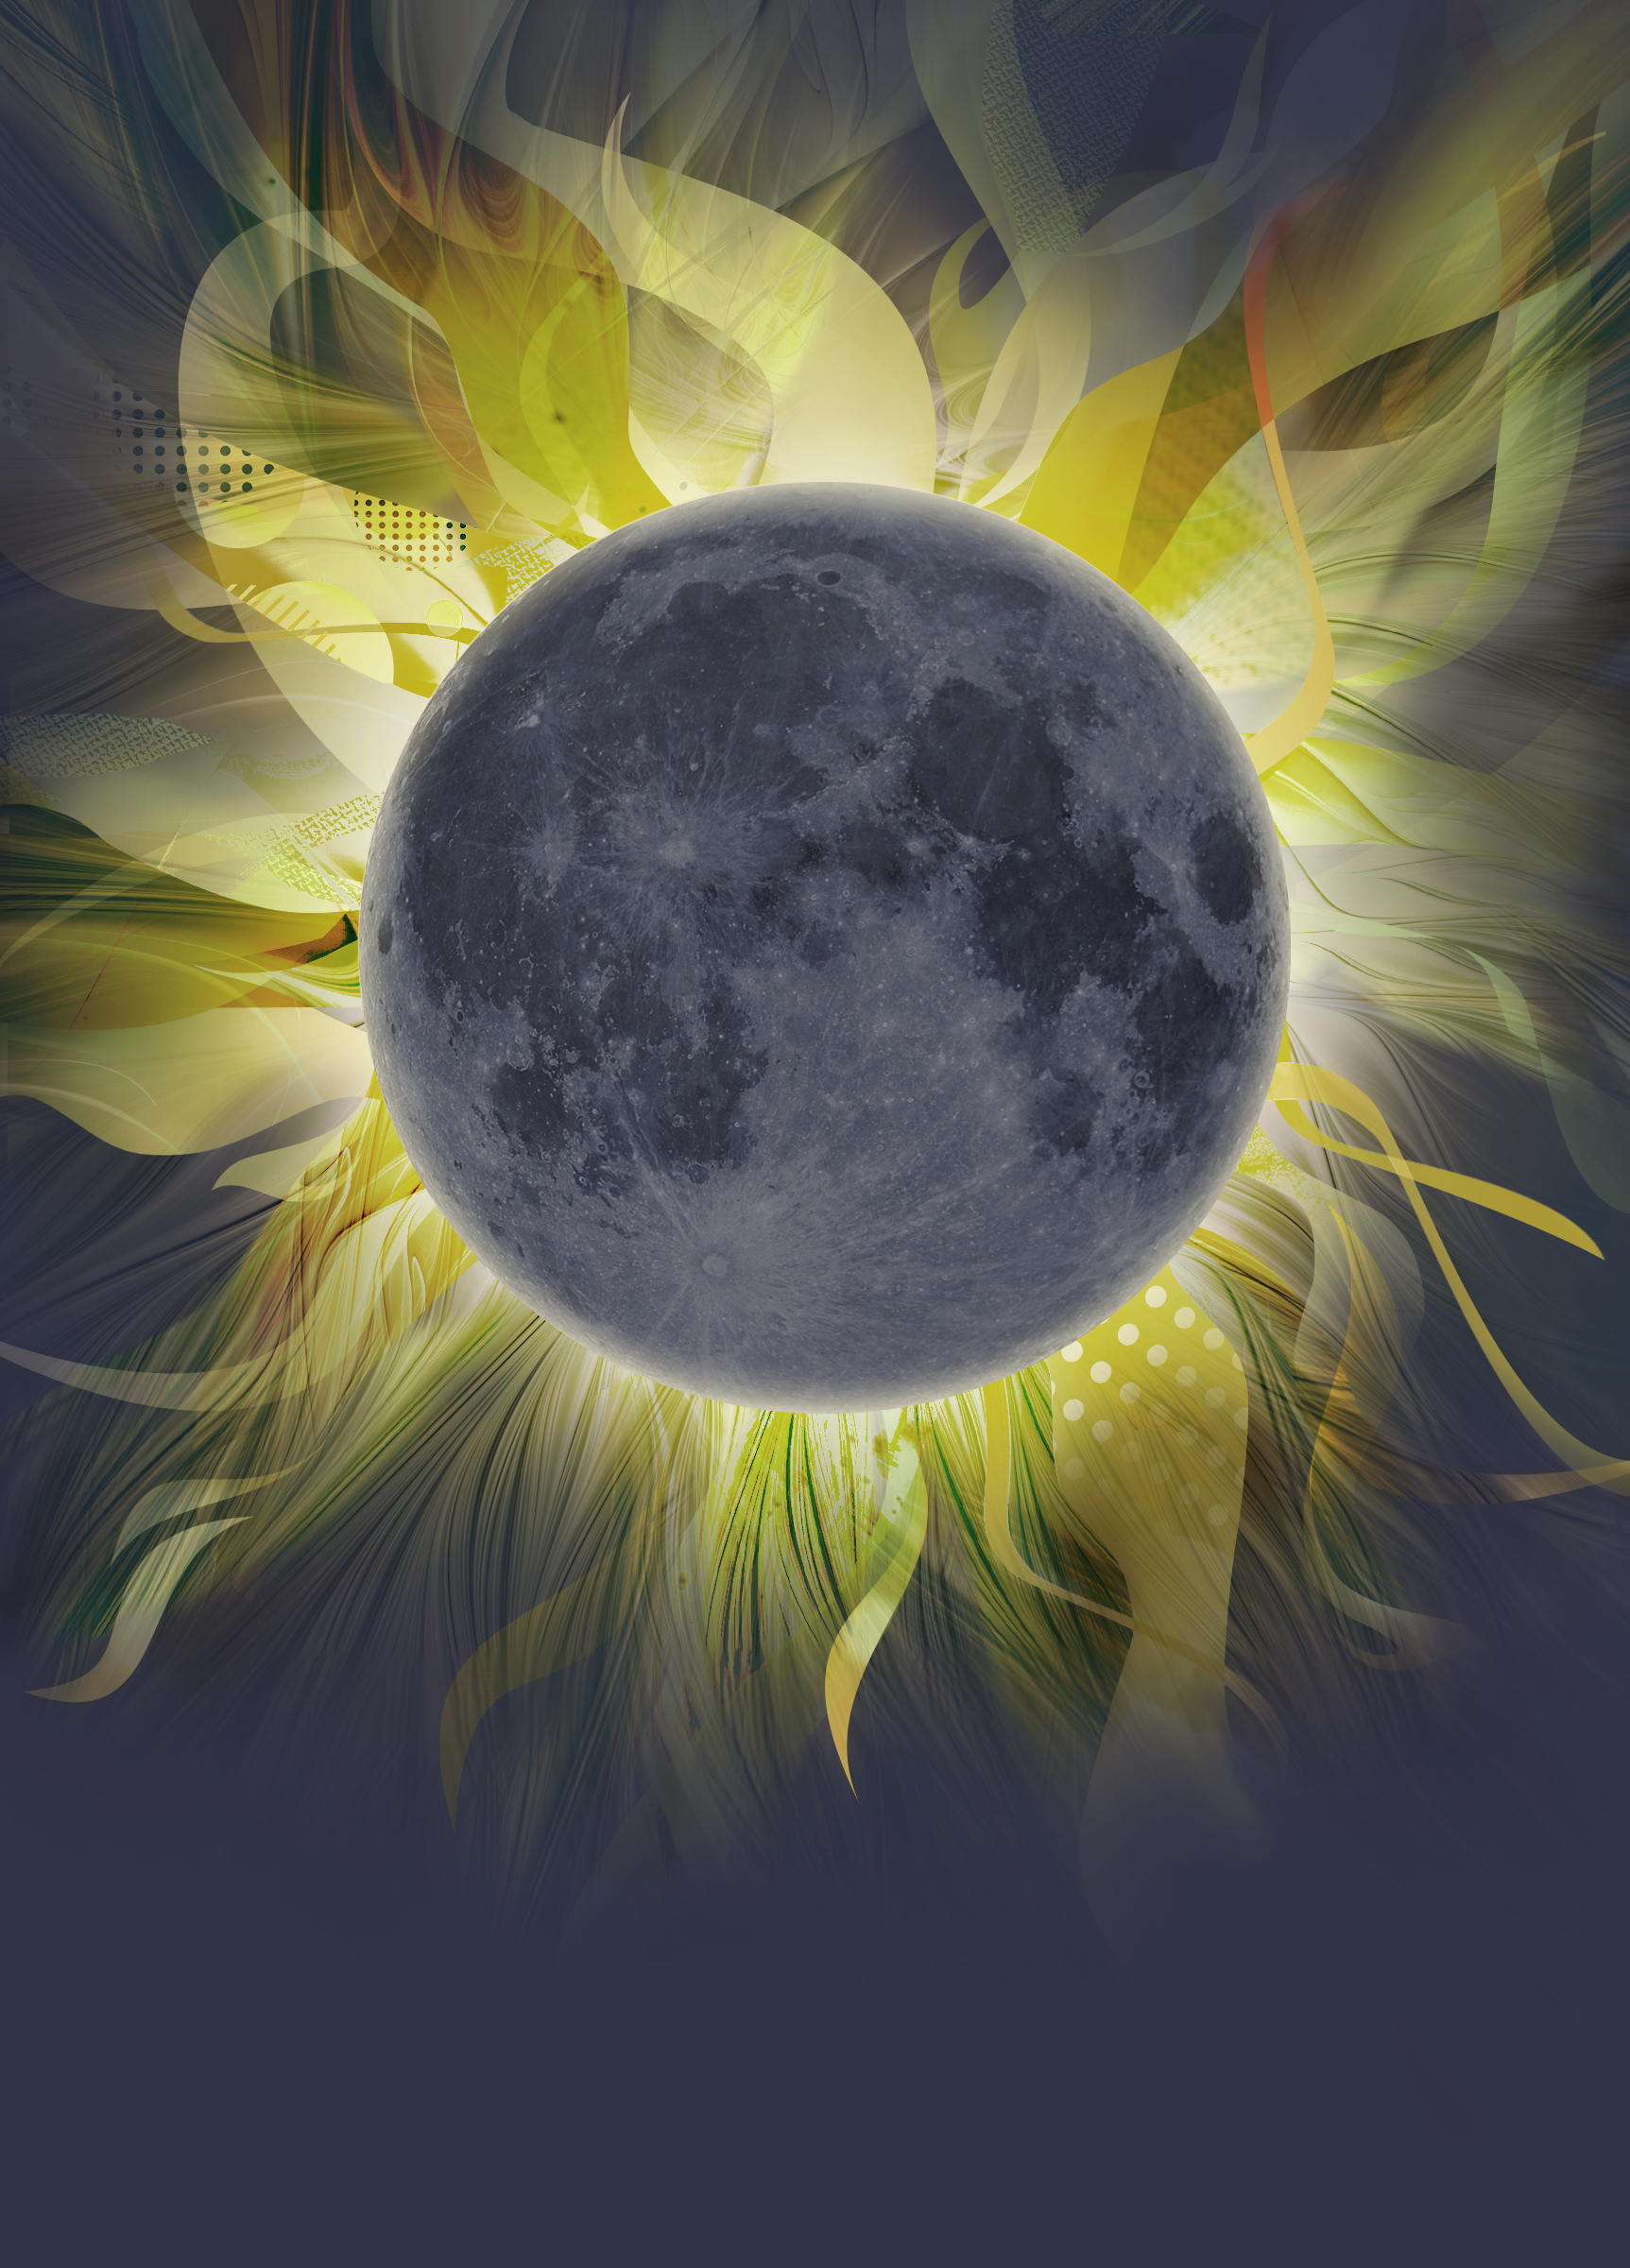 This stylized illustration, created for the 2024 total solar eclipse, shows Earth’s Moon blocking the Sun from view and revealing the Sun’s corona, or outermost atmosphere. The Sun’s magnetic field affects charged particles in the corona, causing elaborate streamers and plumes that are depicted in this artist’s interpretation.